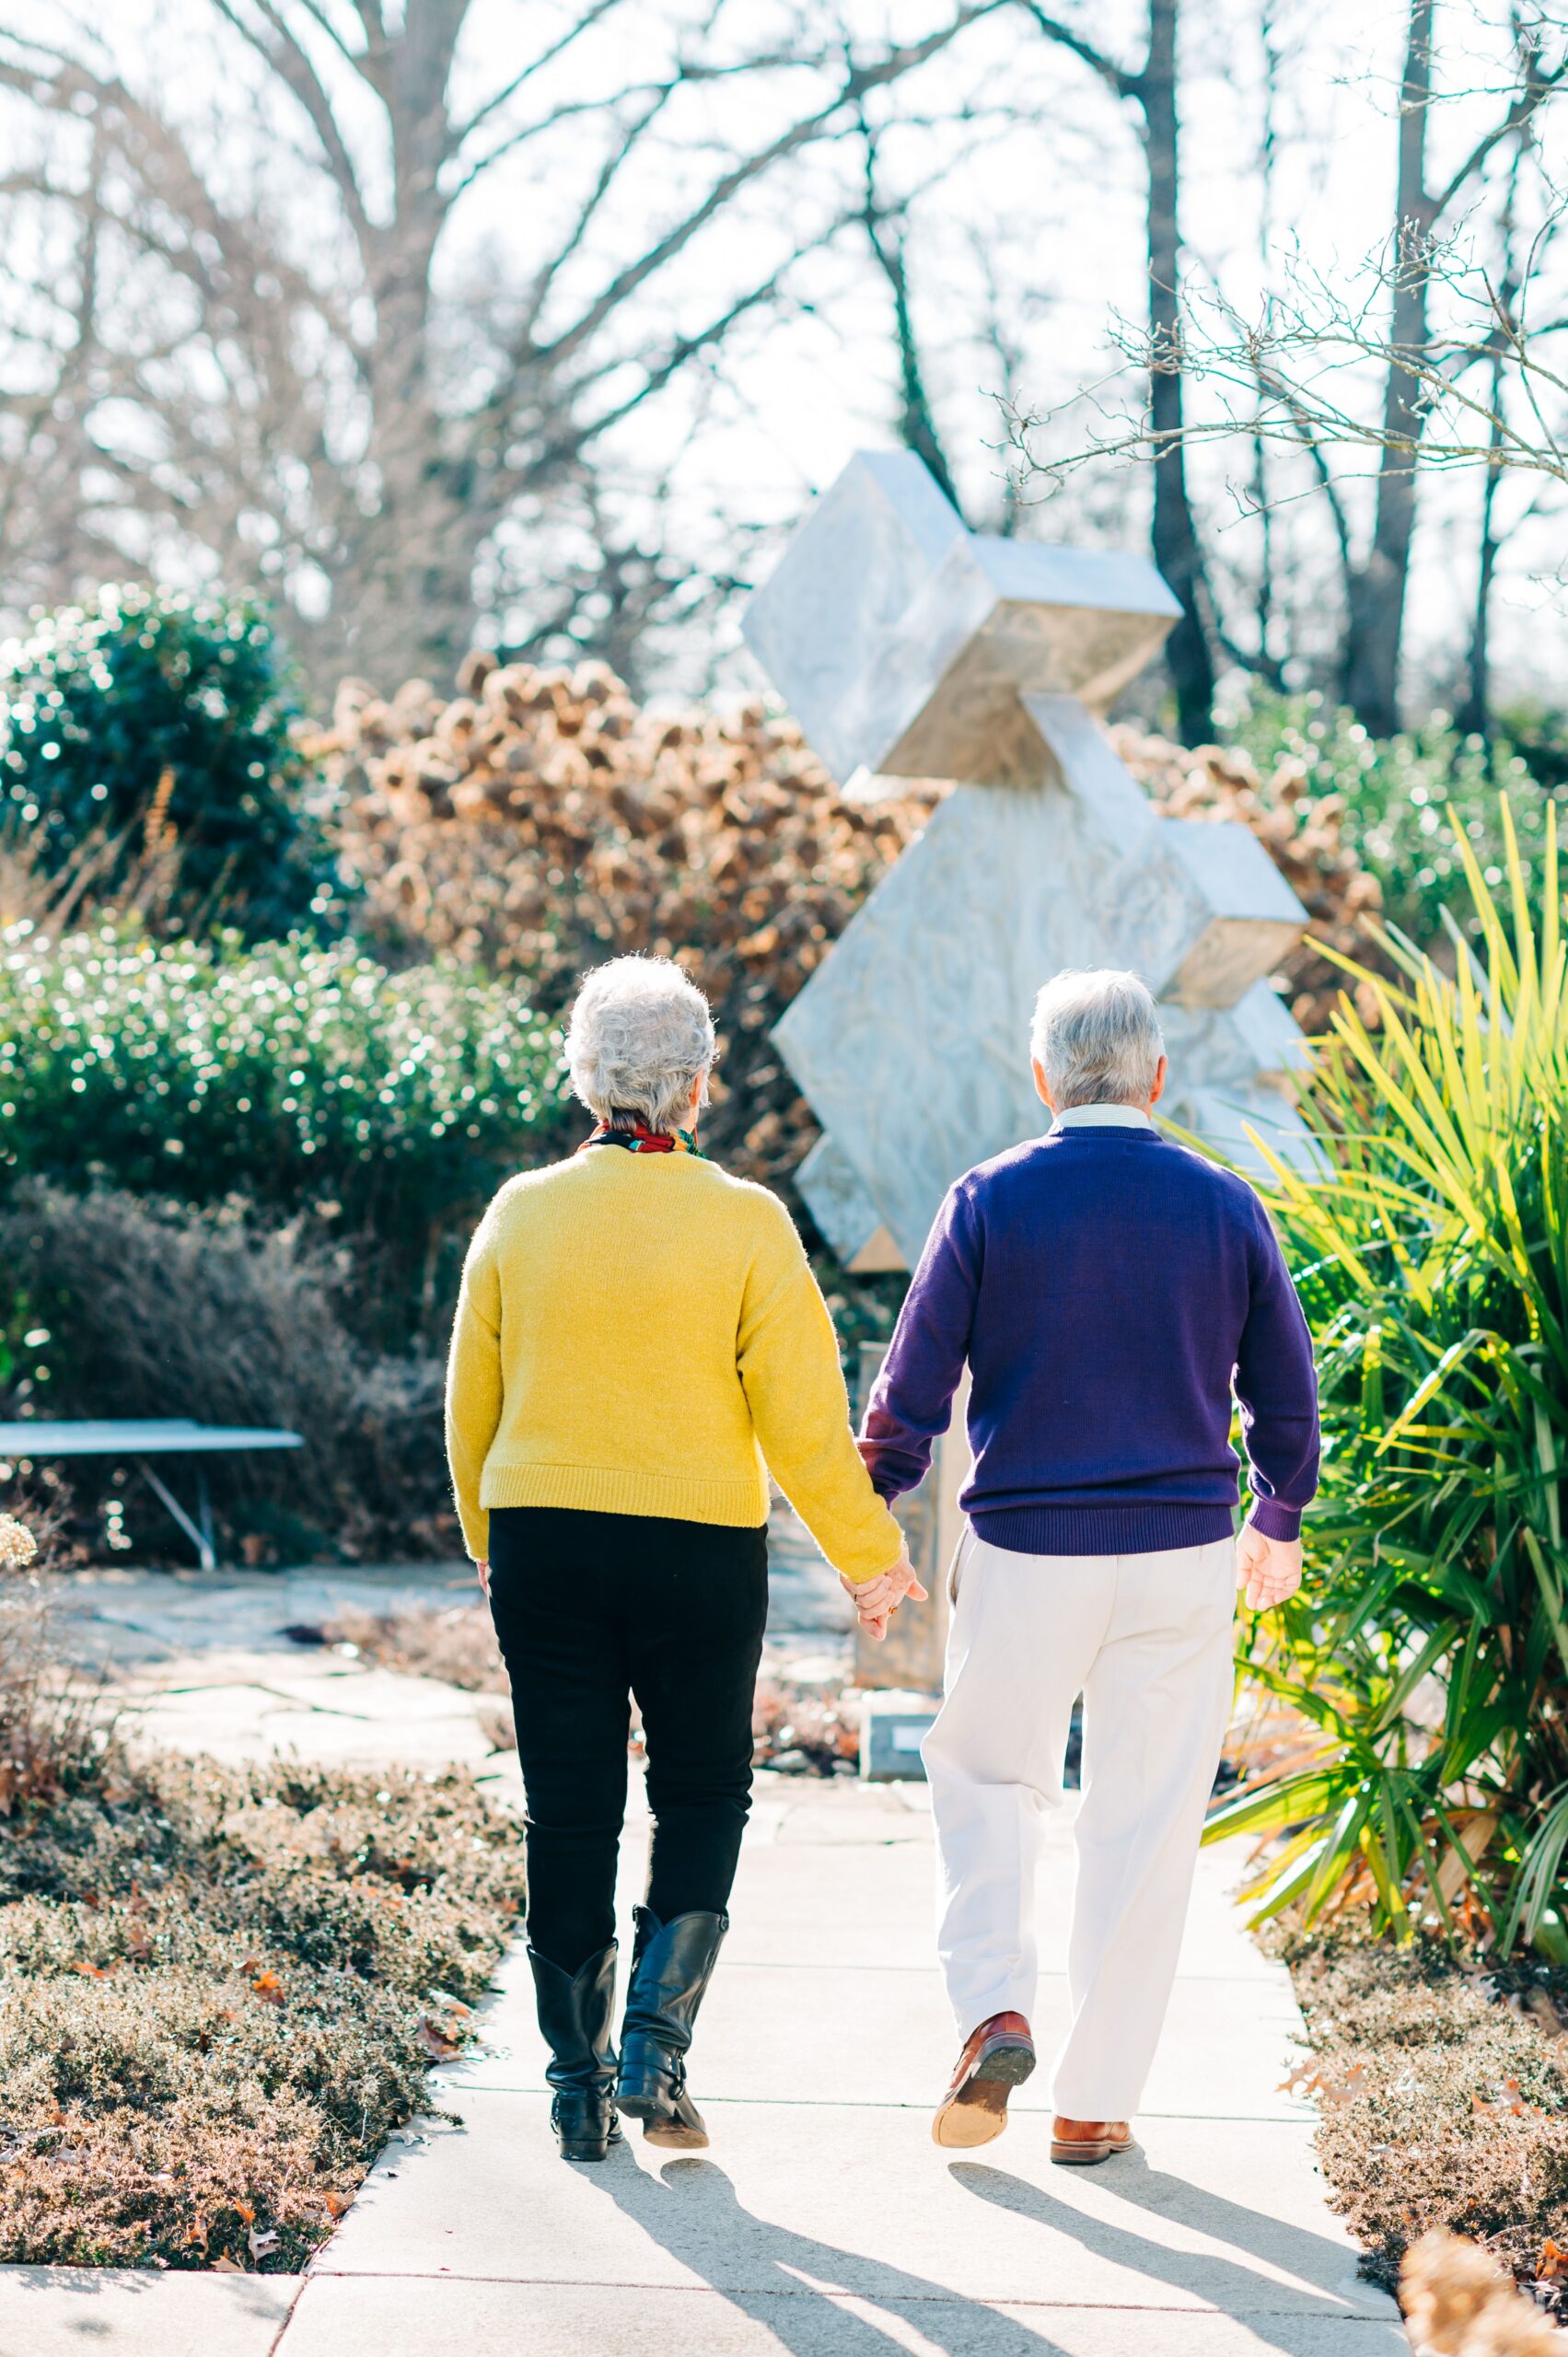 Abby and David Williams walk with their back to the camera, holding hands, as they walk through the Bienenstock Library gardens.